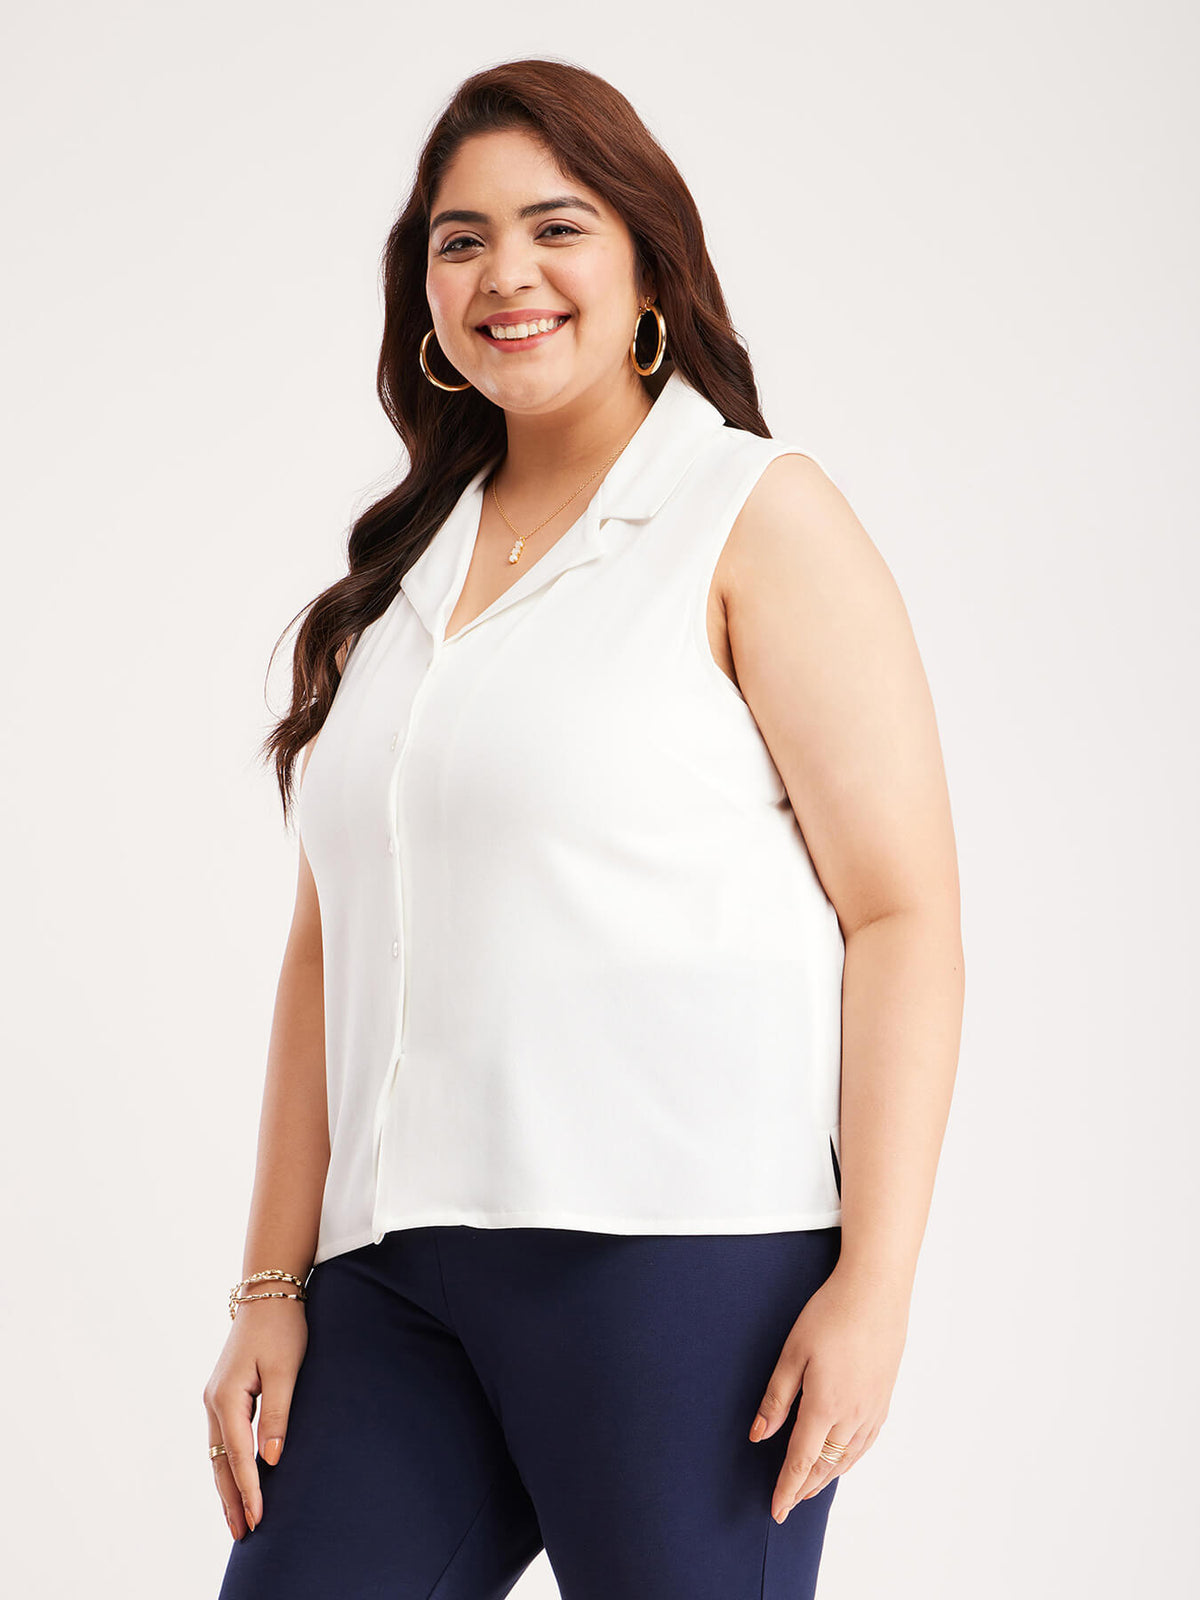 Sleeveless Front Buttoned Top - White